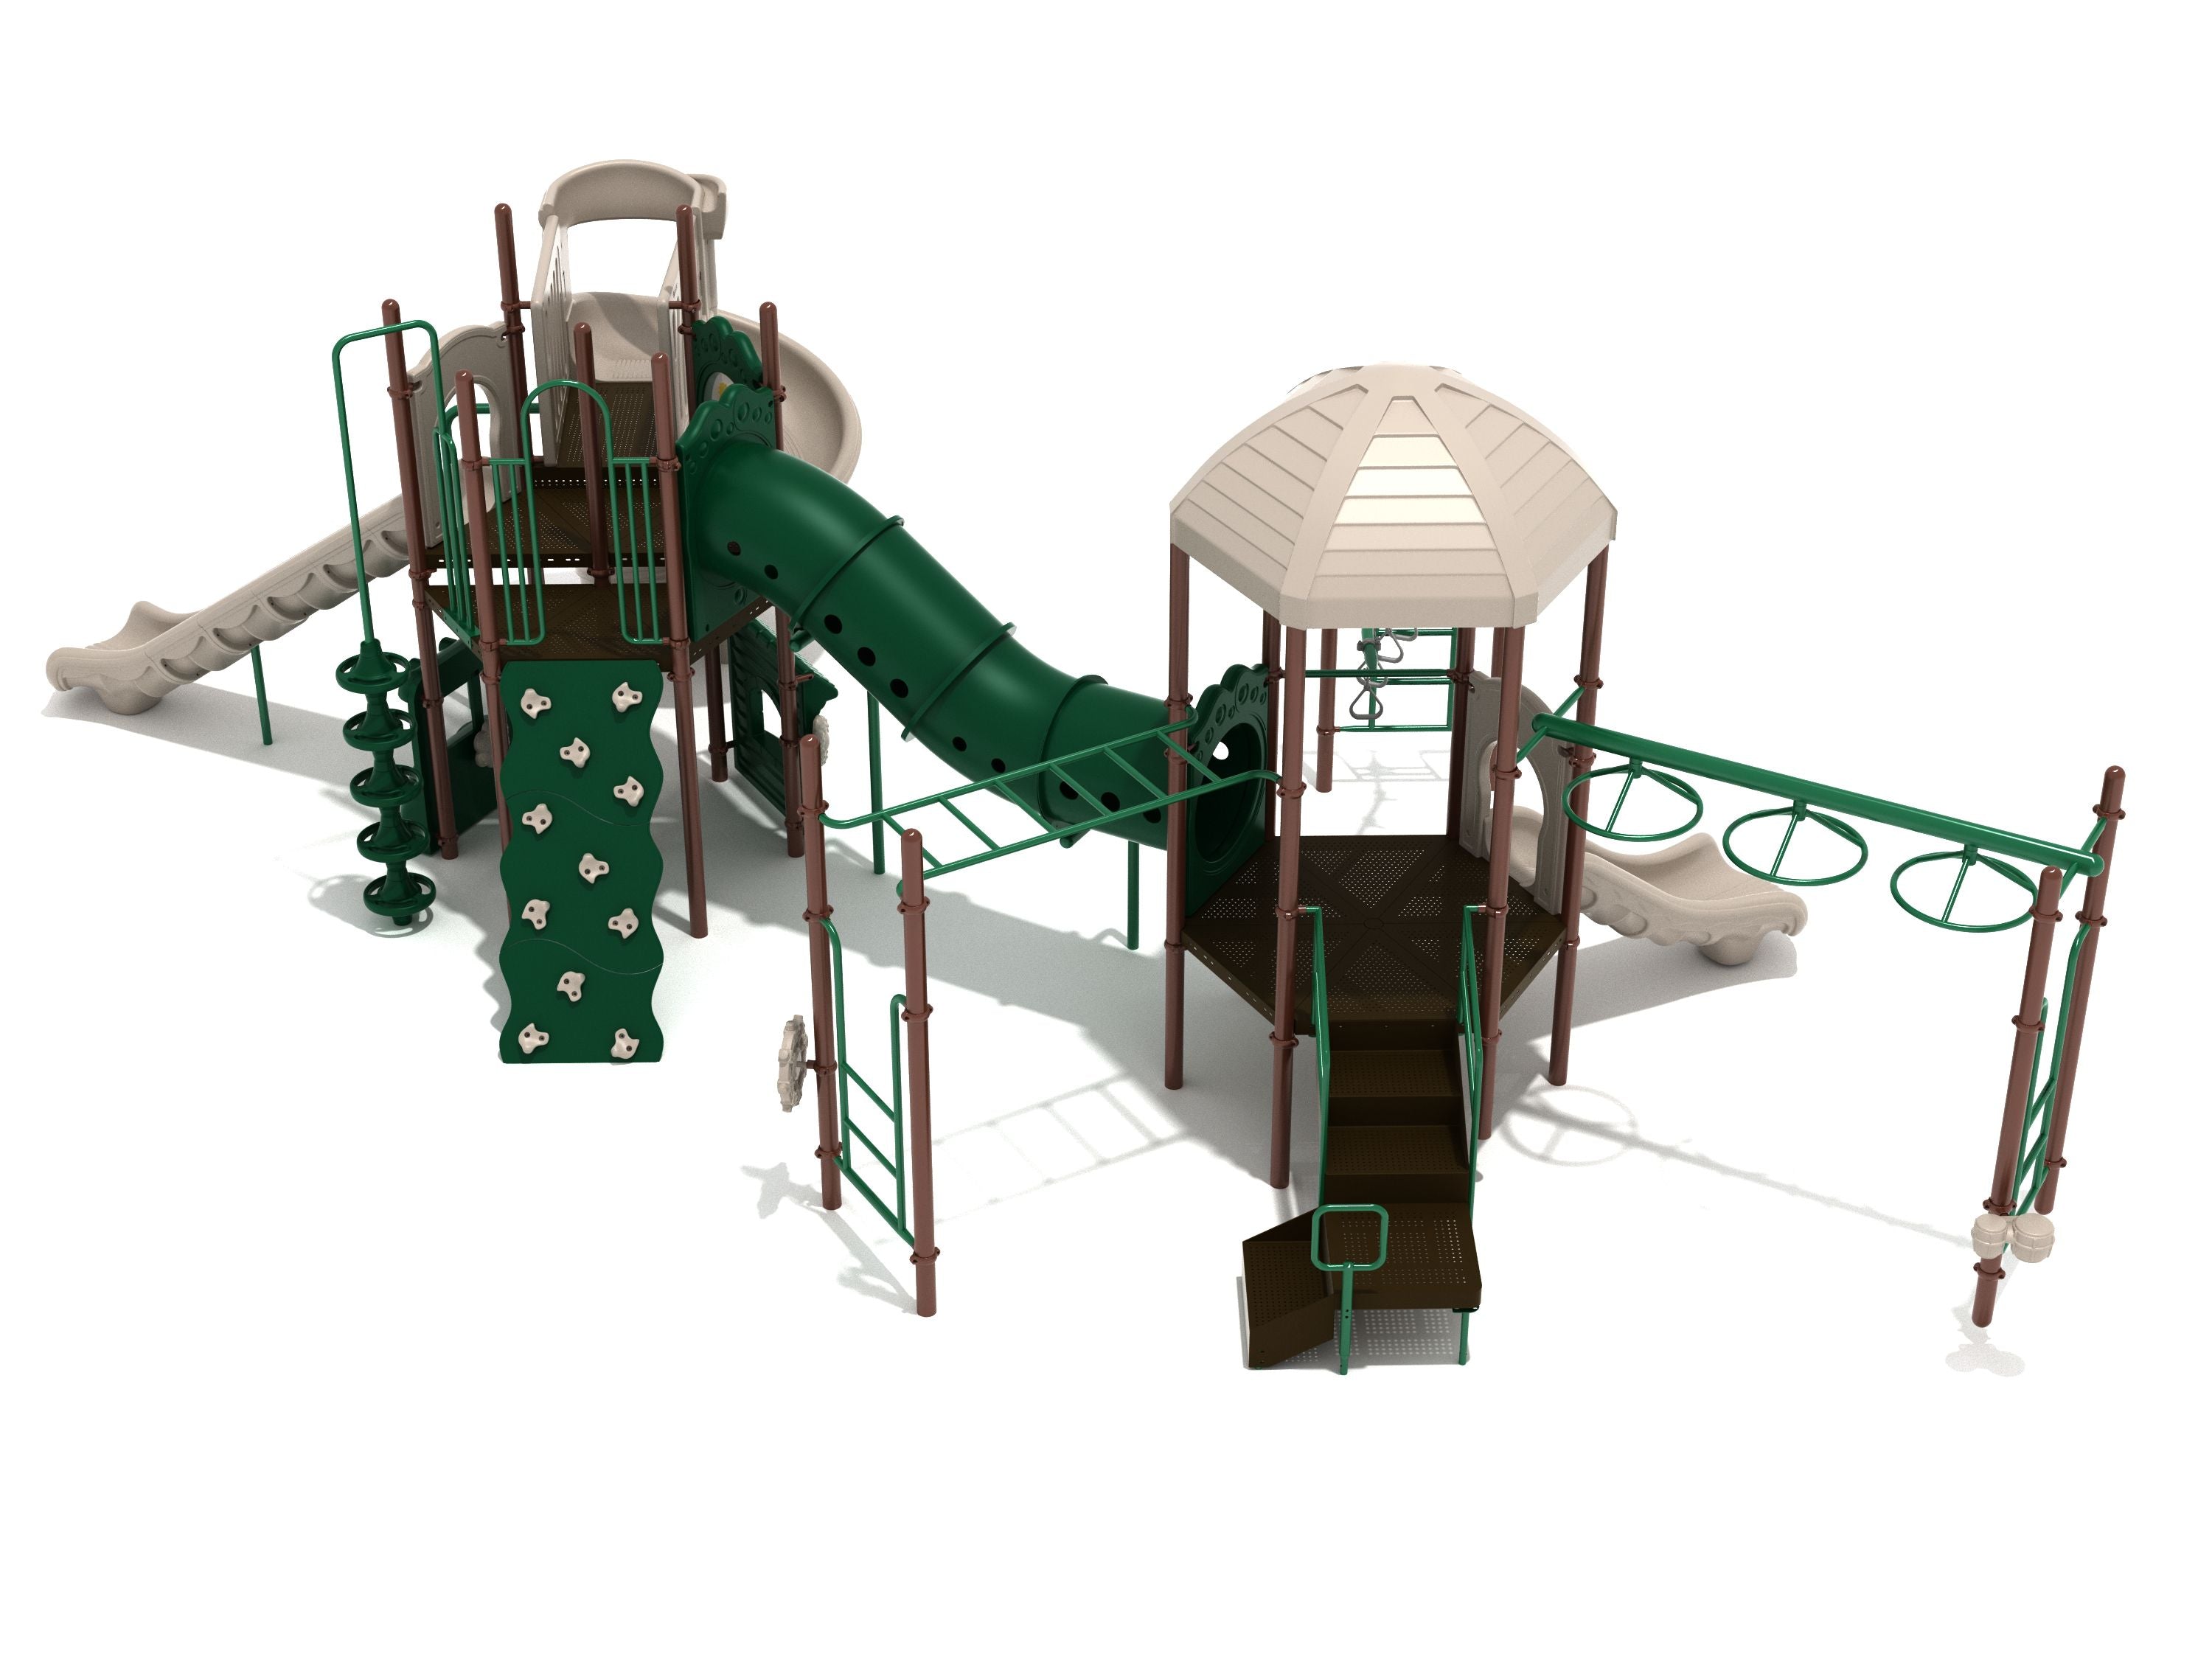 Fairhope Playground Neutral Colors